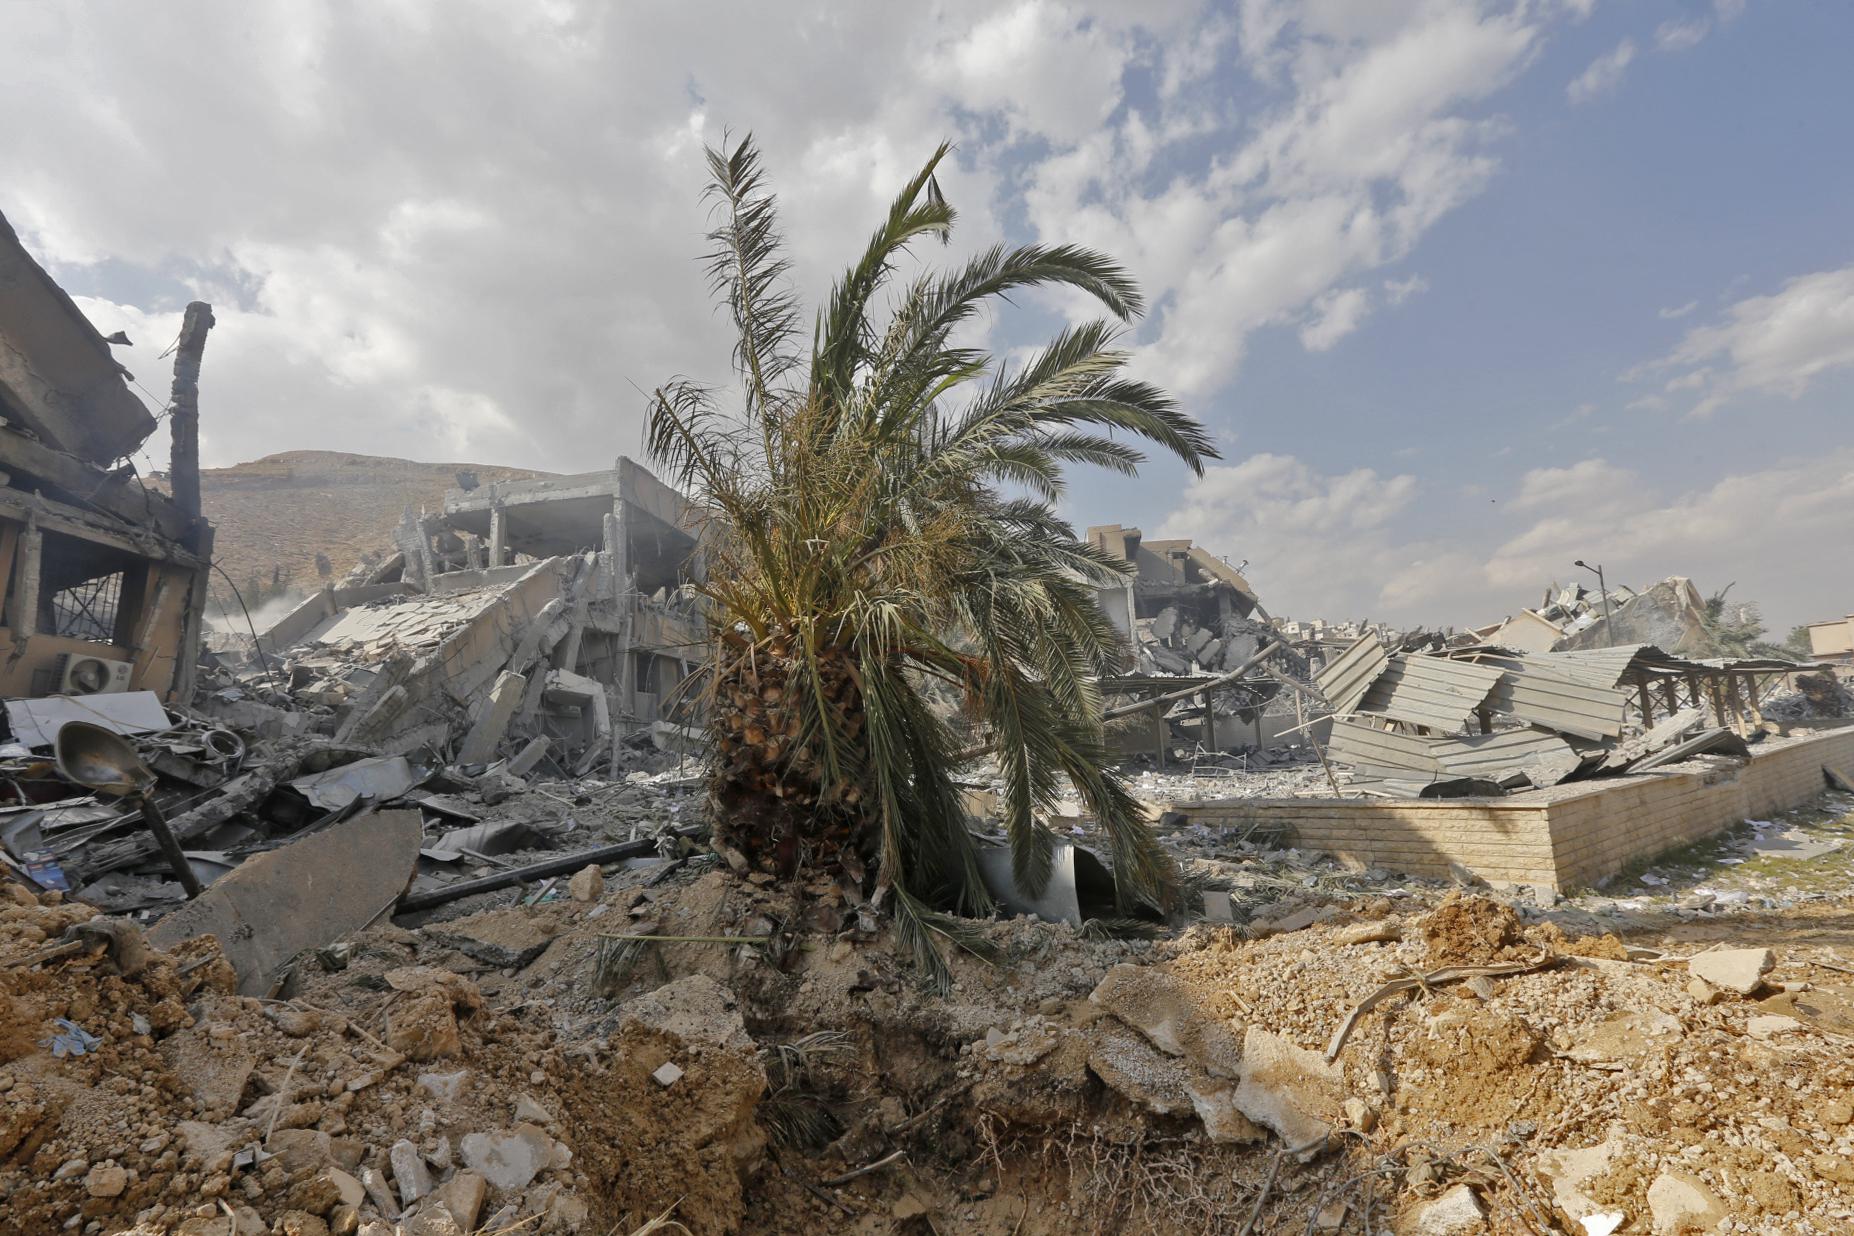 This picture taken on April 14, 2018 shows the wreckage of a building described as part of the Scientific Studies and Research Centre (SSRC) compound in the Barzeh district, north of Damascus, during a press tour organised by the Syrian information ministry.
The United States, Britain and France launched strikes against Syrian President Bashar al-Assad's regime early on April 14 in response to an alleged chemical weapons attack after mulling military action for nearly a week. Syrian state news agency SANA reported several missiles hit a research centre in Barzeh, north of Damascus, 'destroying a building that included scientific labs and a training centre'. / AFP PHOTO / Louai Beshara        (Photo credit should read LOUAI BESHARA/AFP/Getty Images)